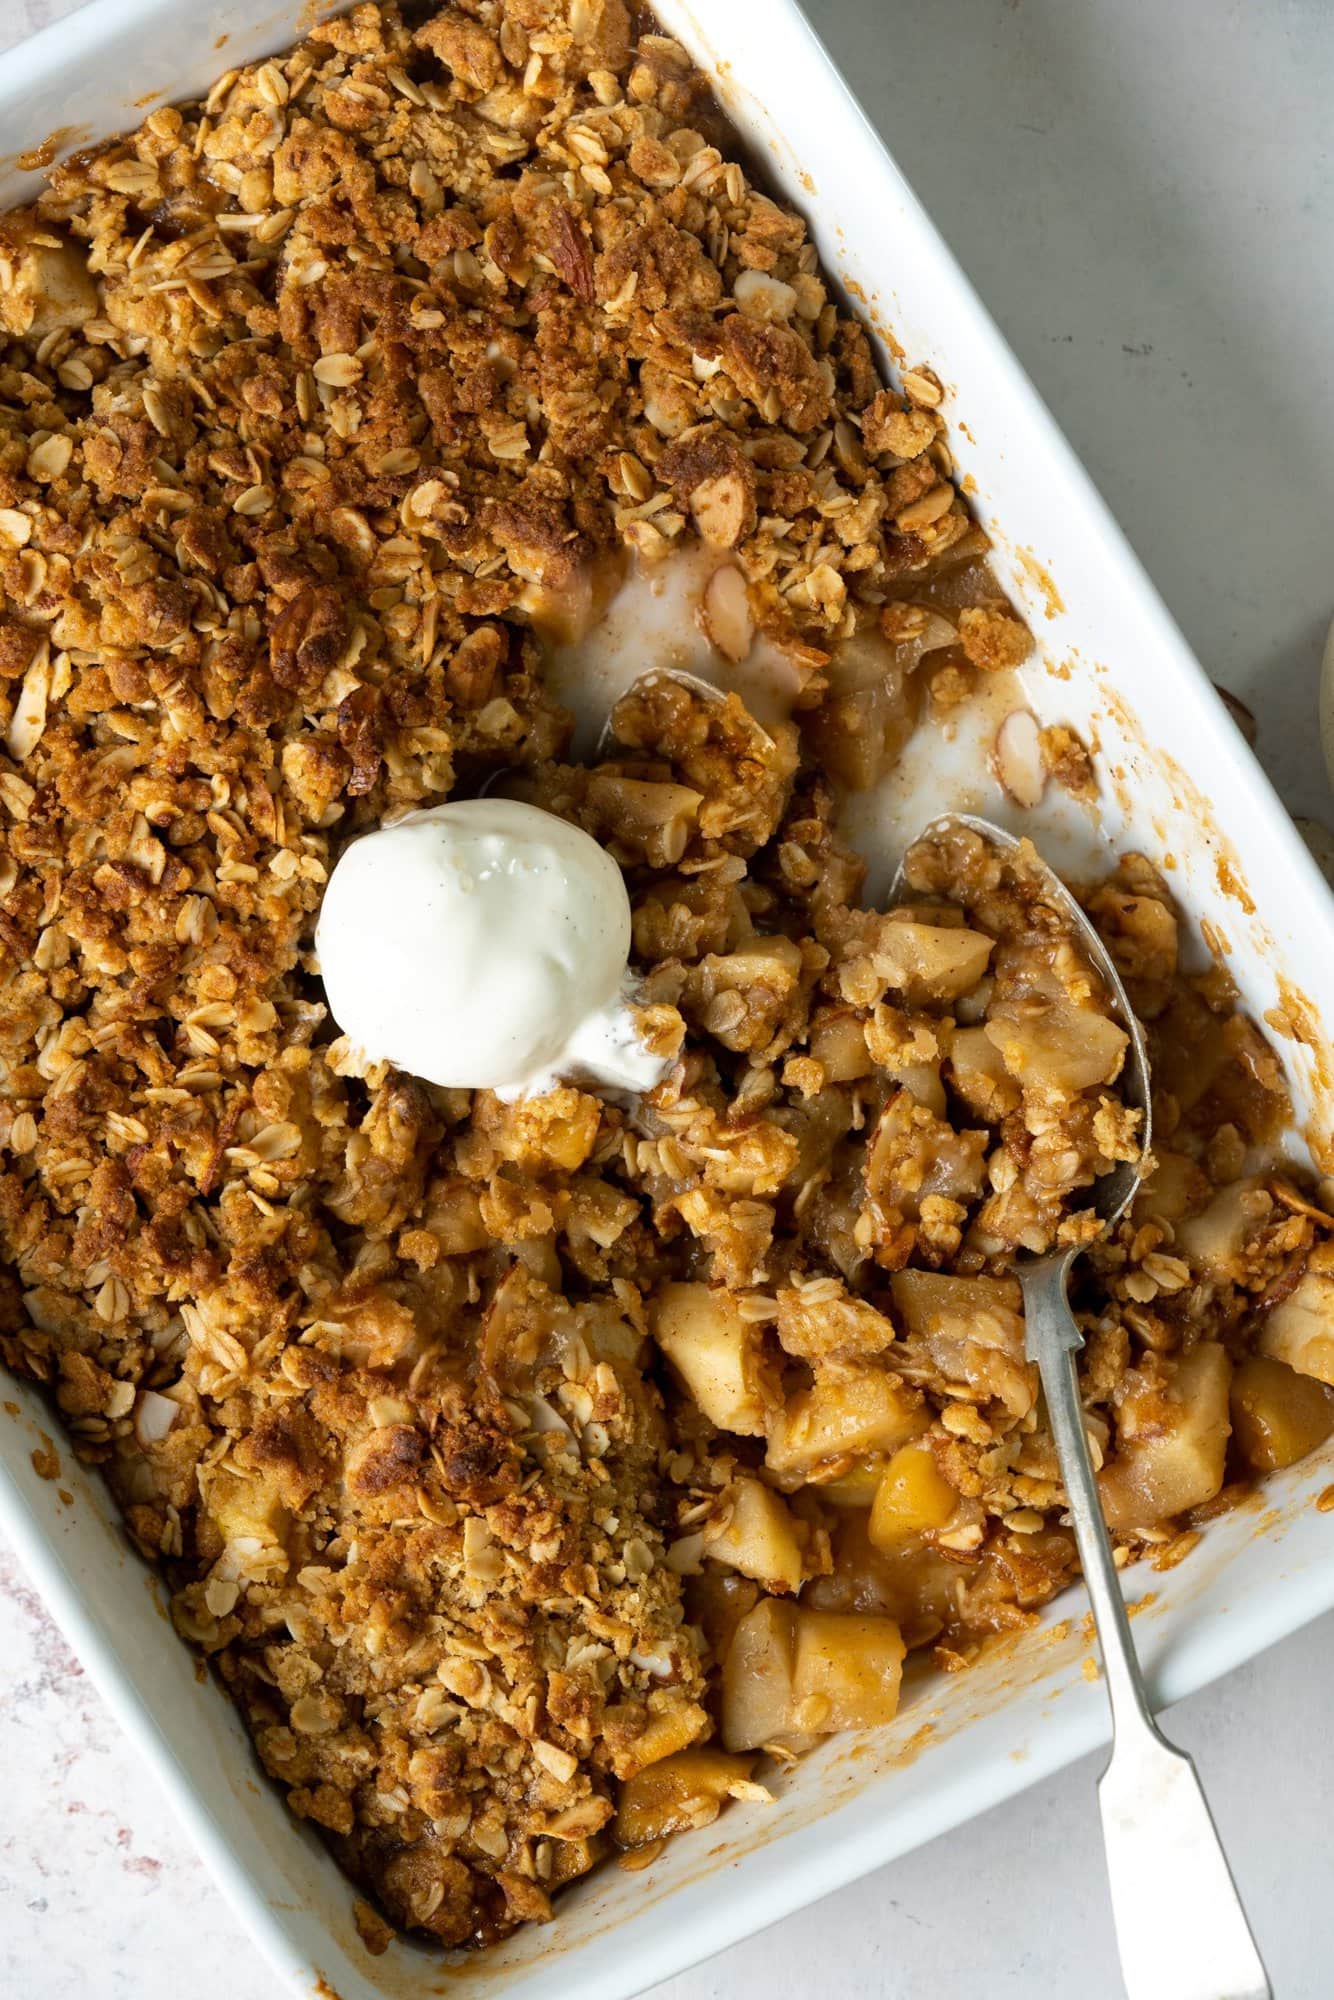 Apple crisp in a baking tray with a scoop of vanilla ice cream on top